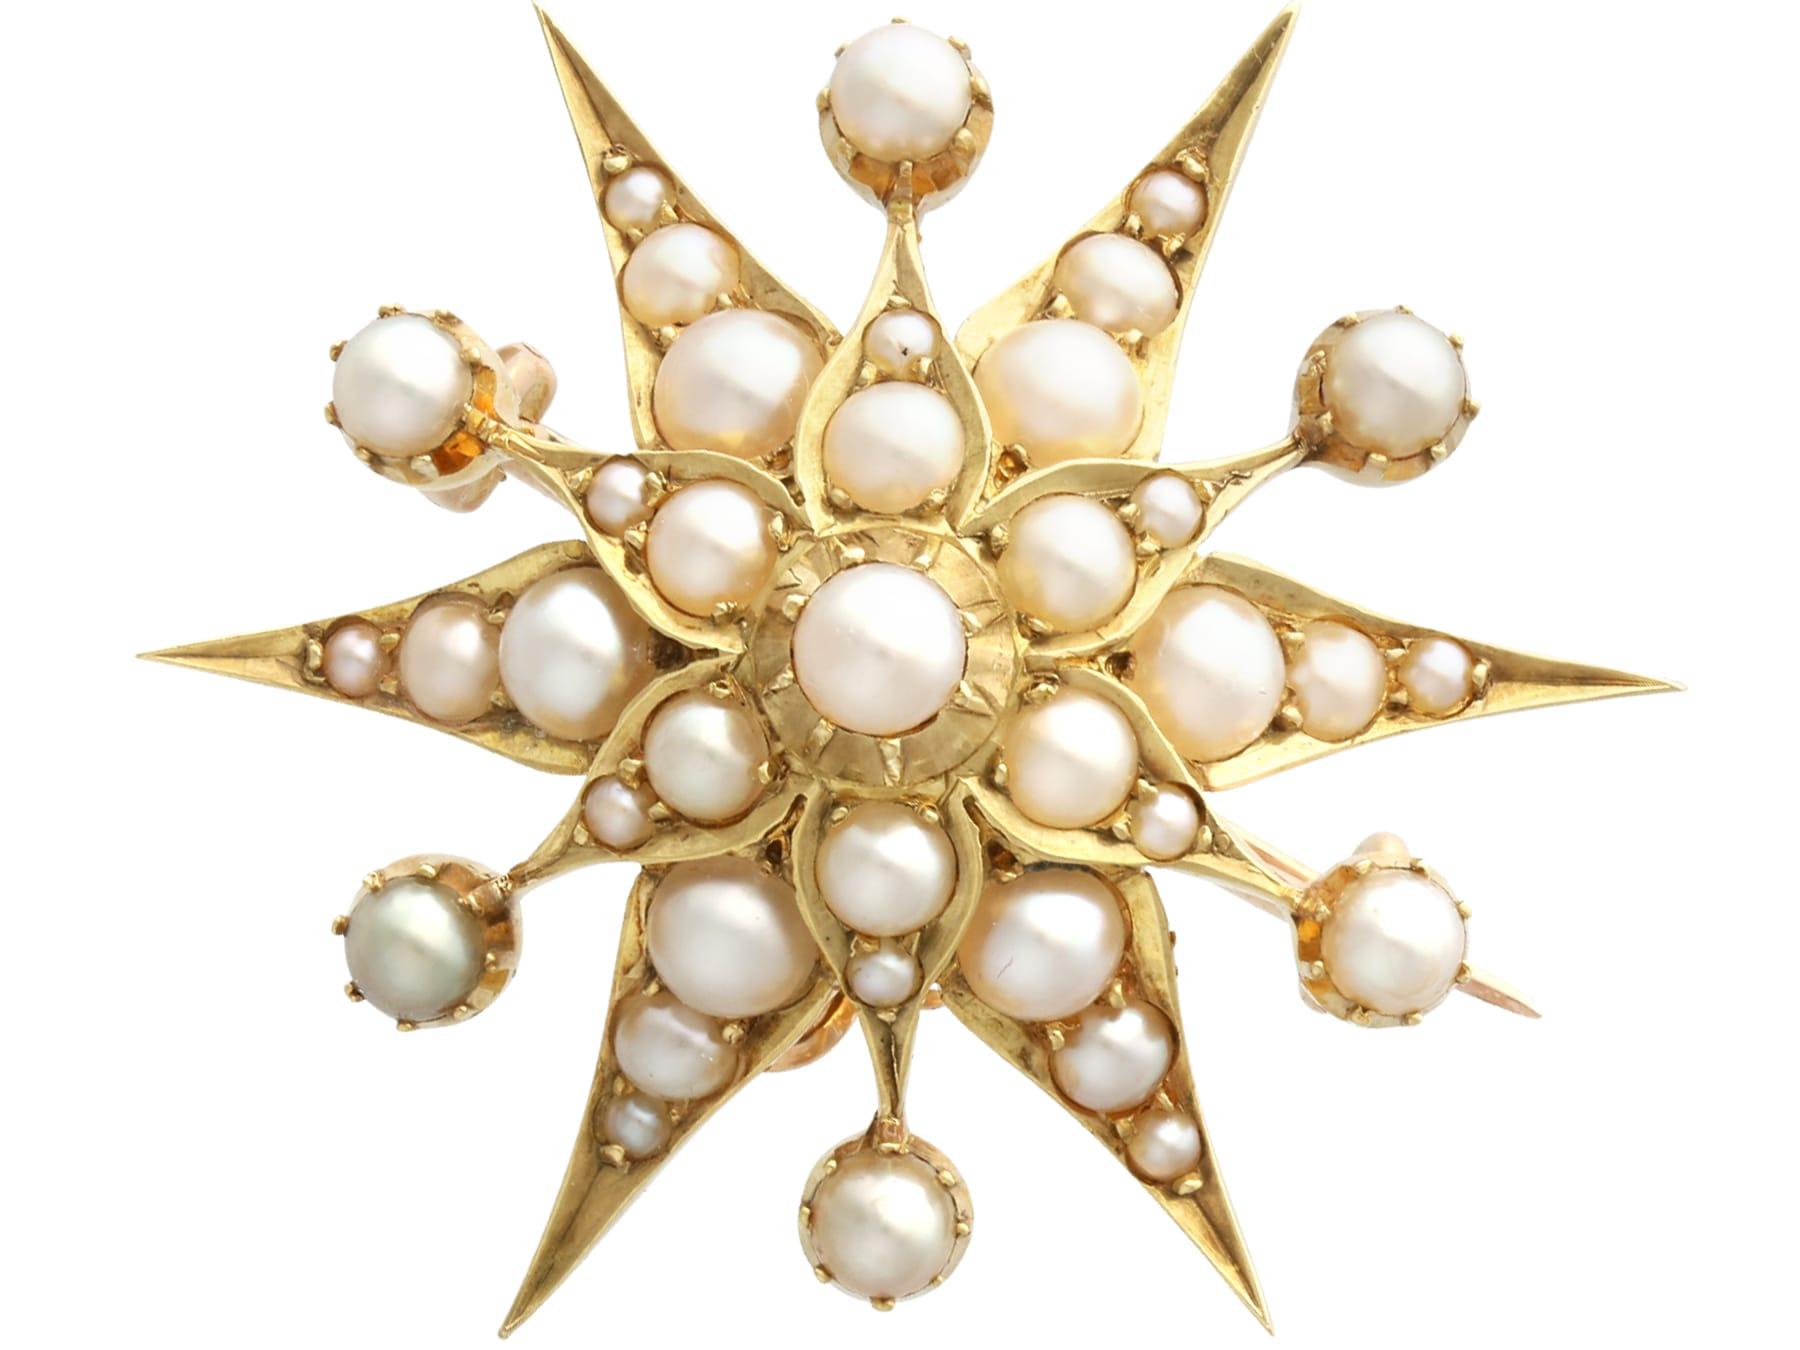 Antique Seed Pearl and 15k Yellow Gold Pendant / Brooch Circa 1920 In Excellent Condition For Sale In Jesmond, Newcastle Upon Tyne